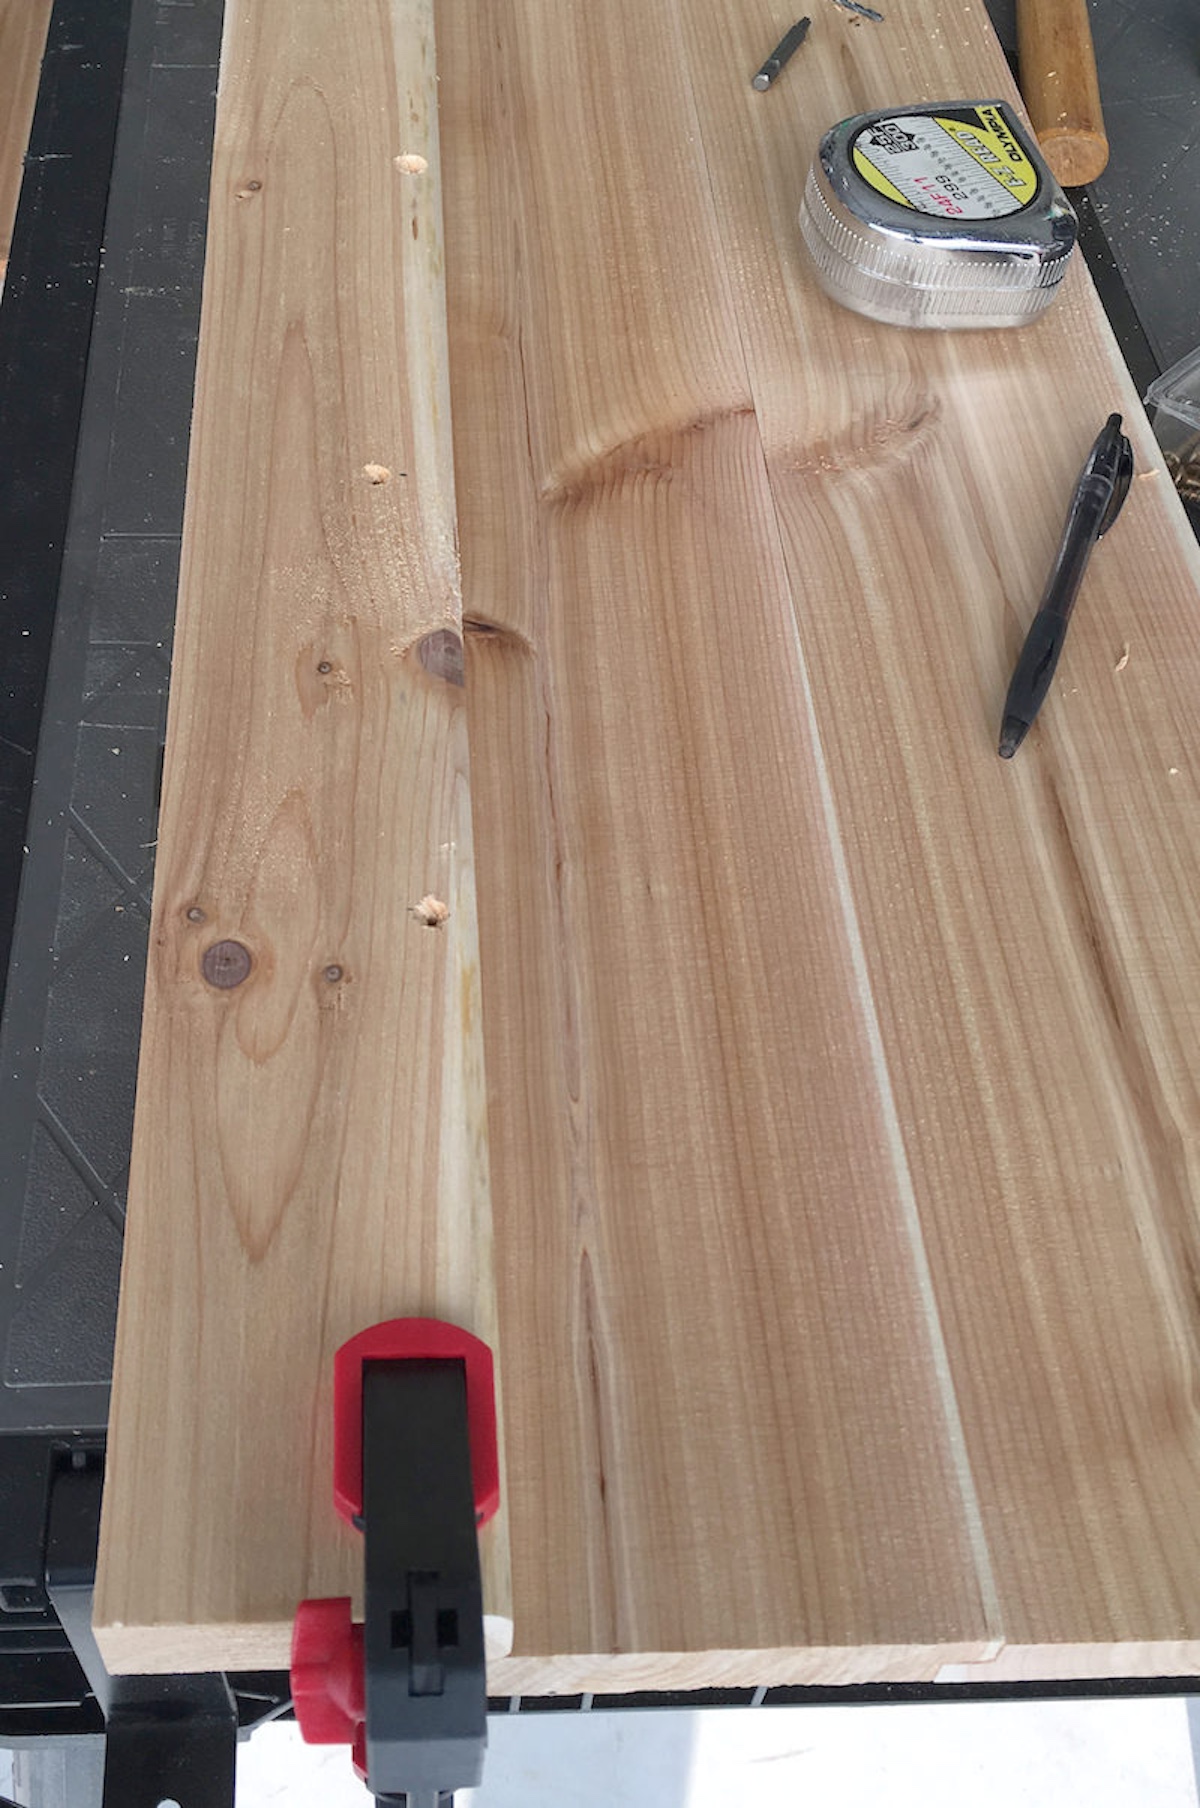 Drilled pilot holes on the base piece of the table